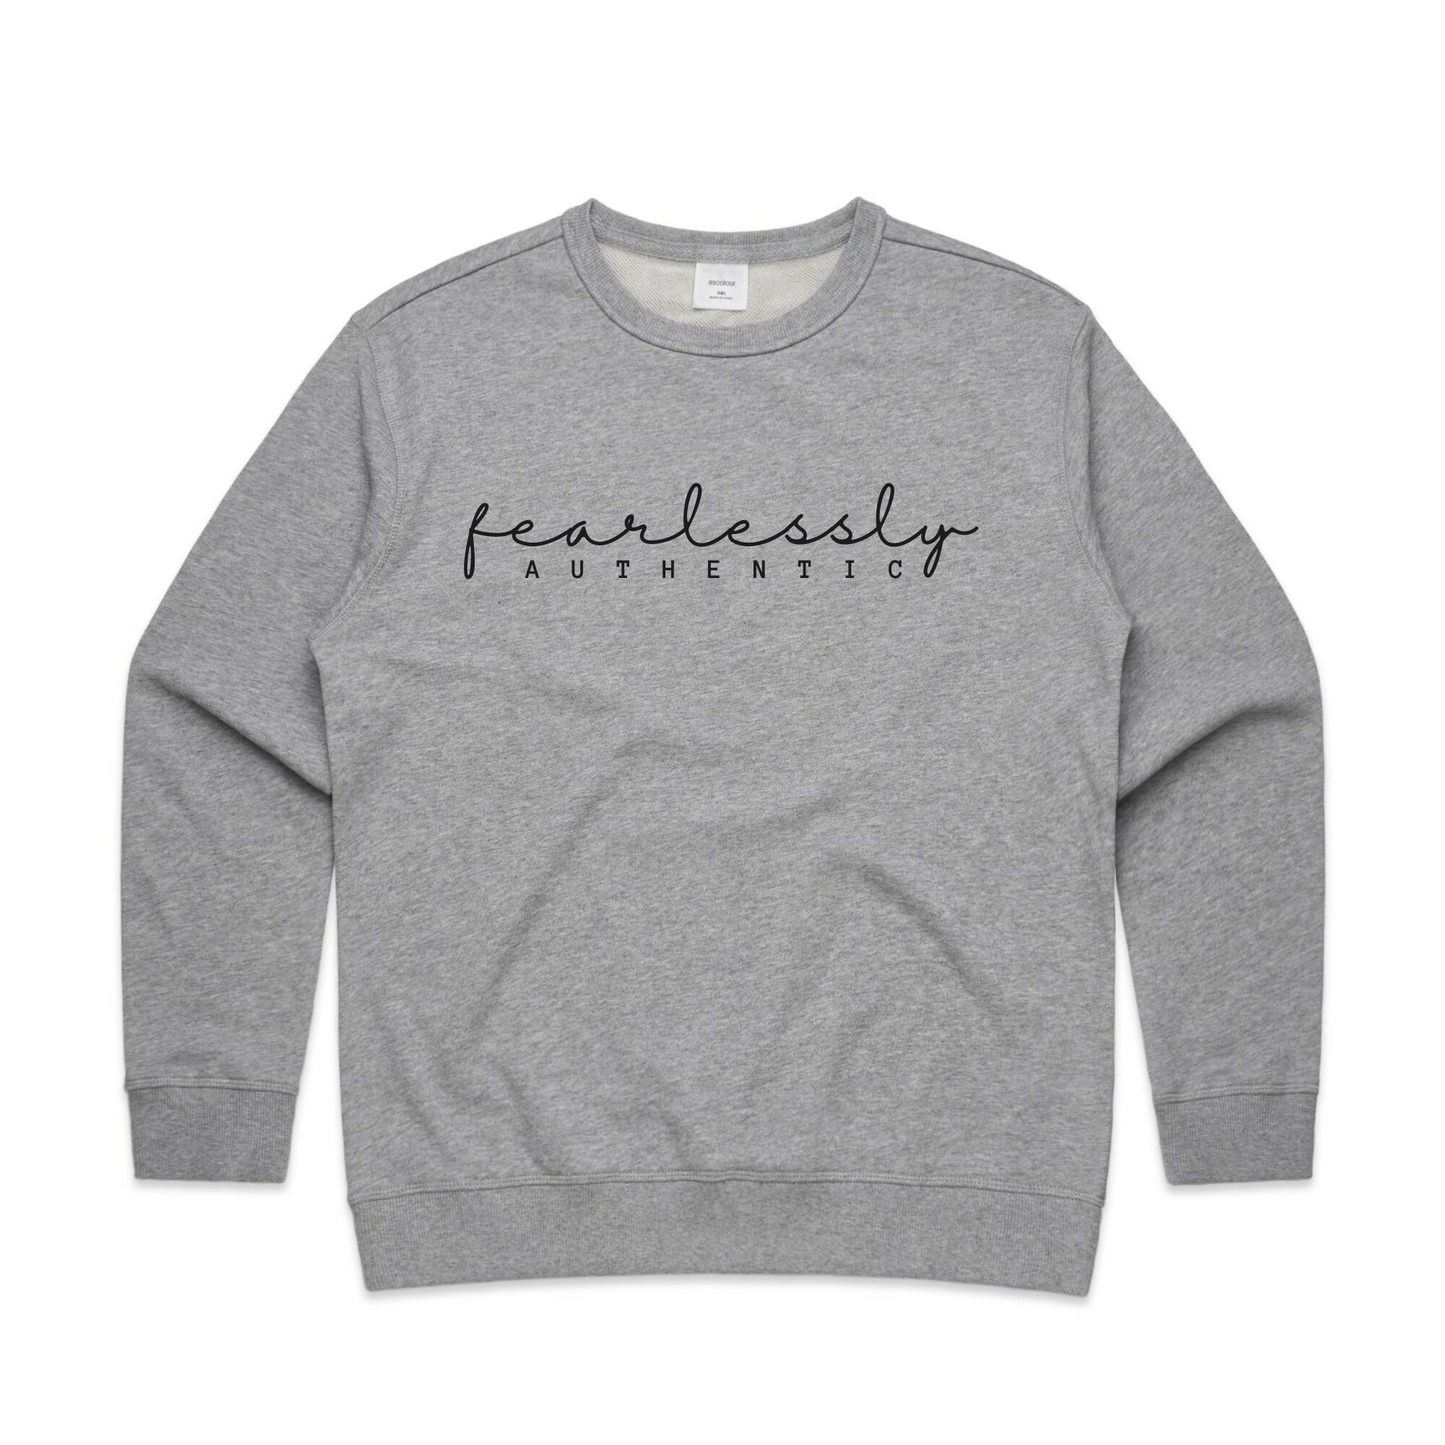 Fearlessly Authentic in black text on a grey crew neck jumper